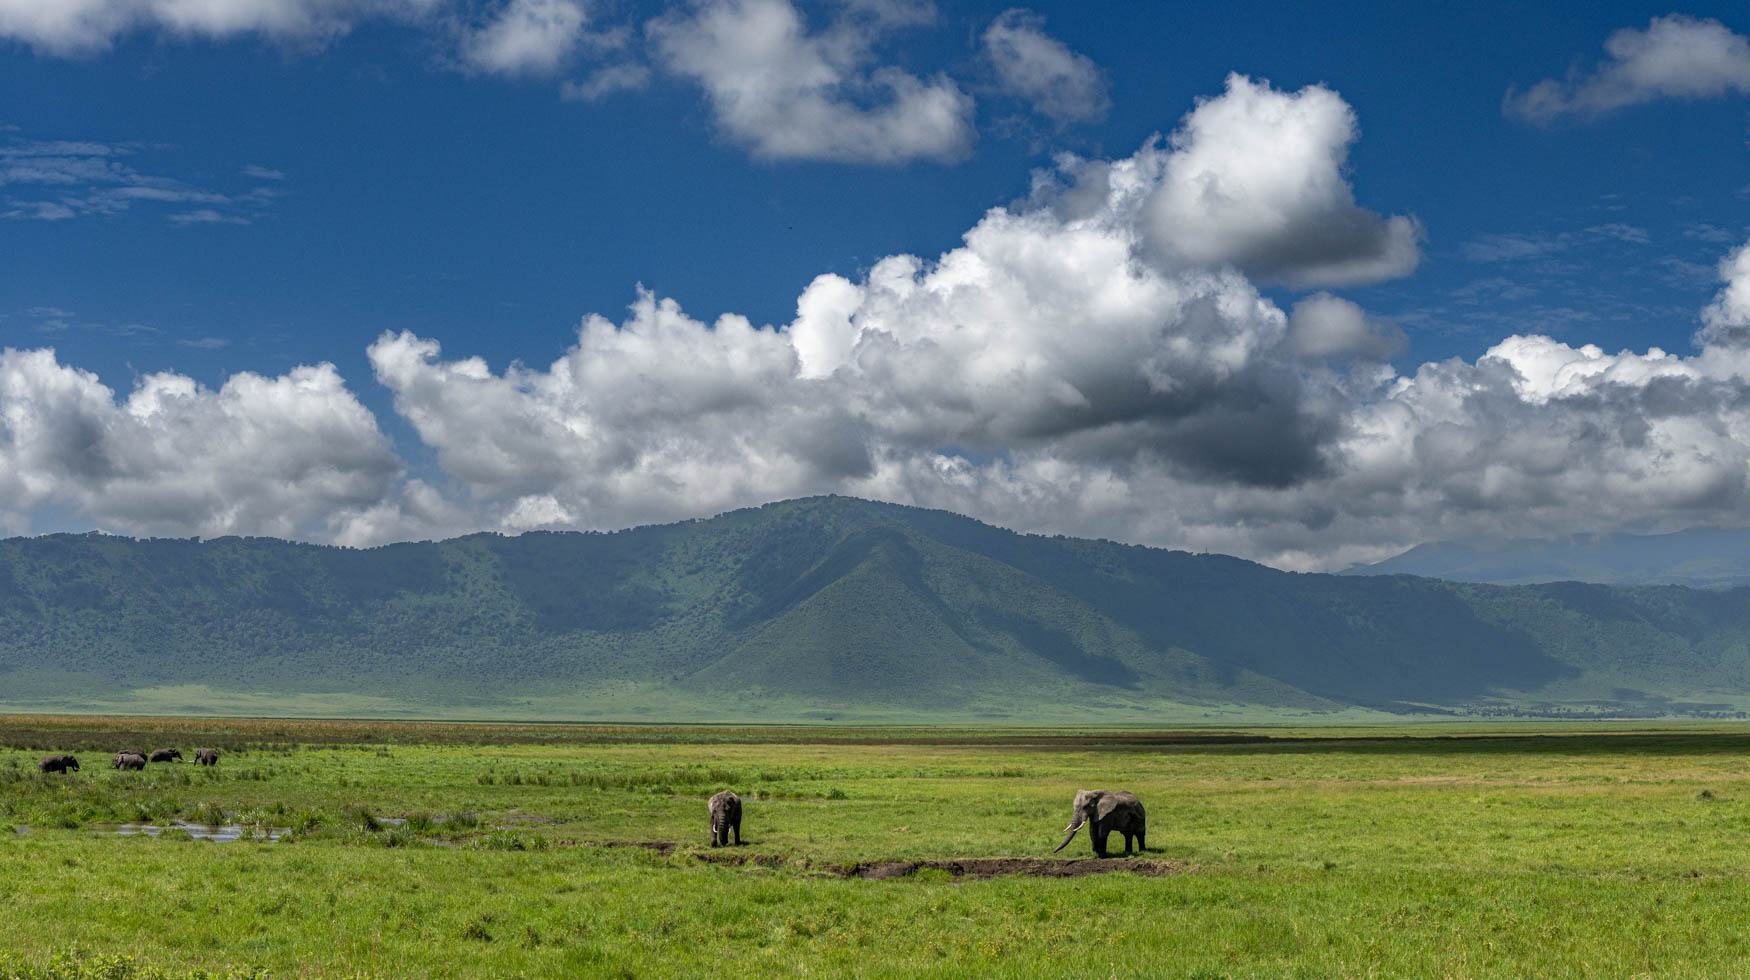 Elephants graze on the plains of the Ngrongoro Crater in Tanzania.